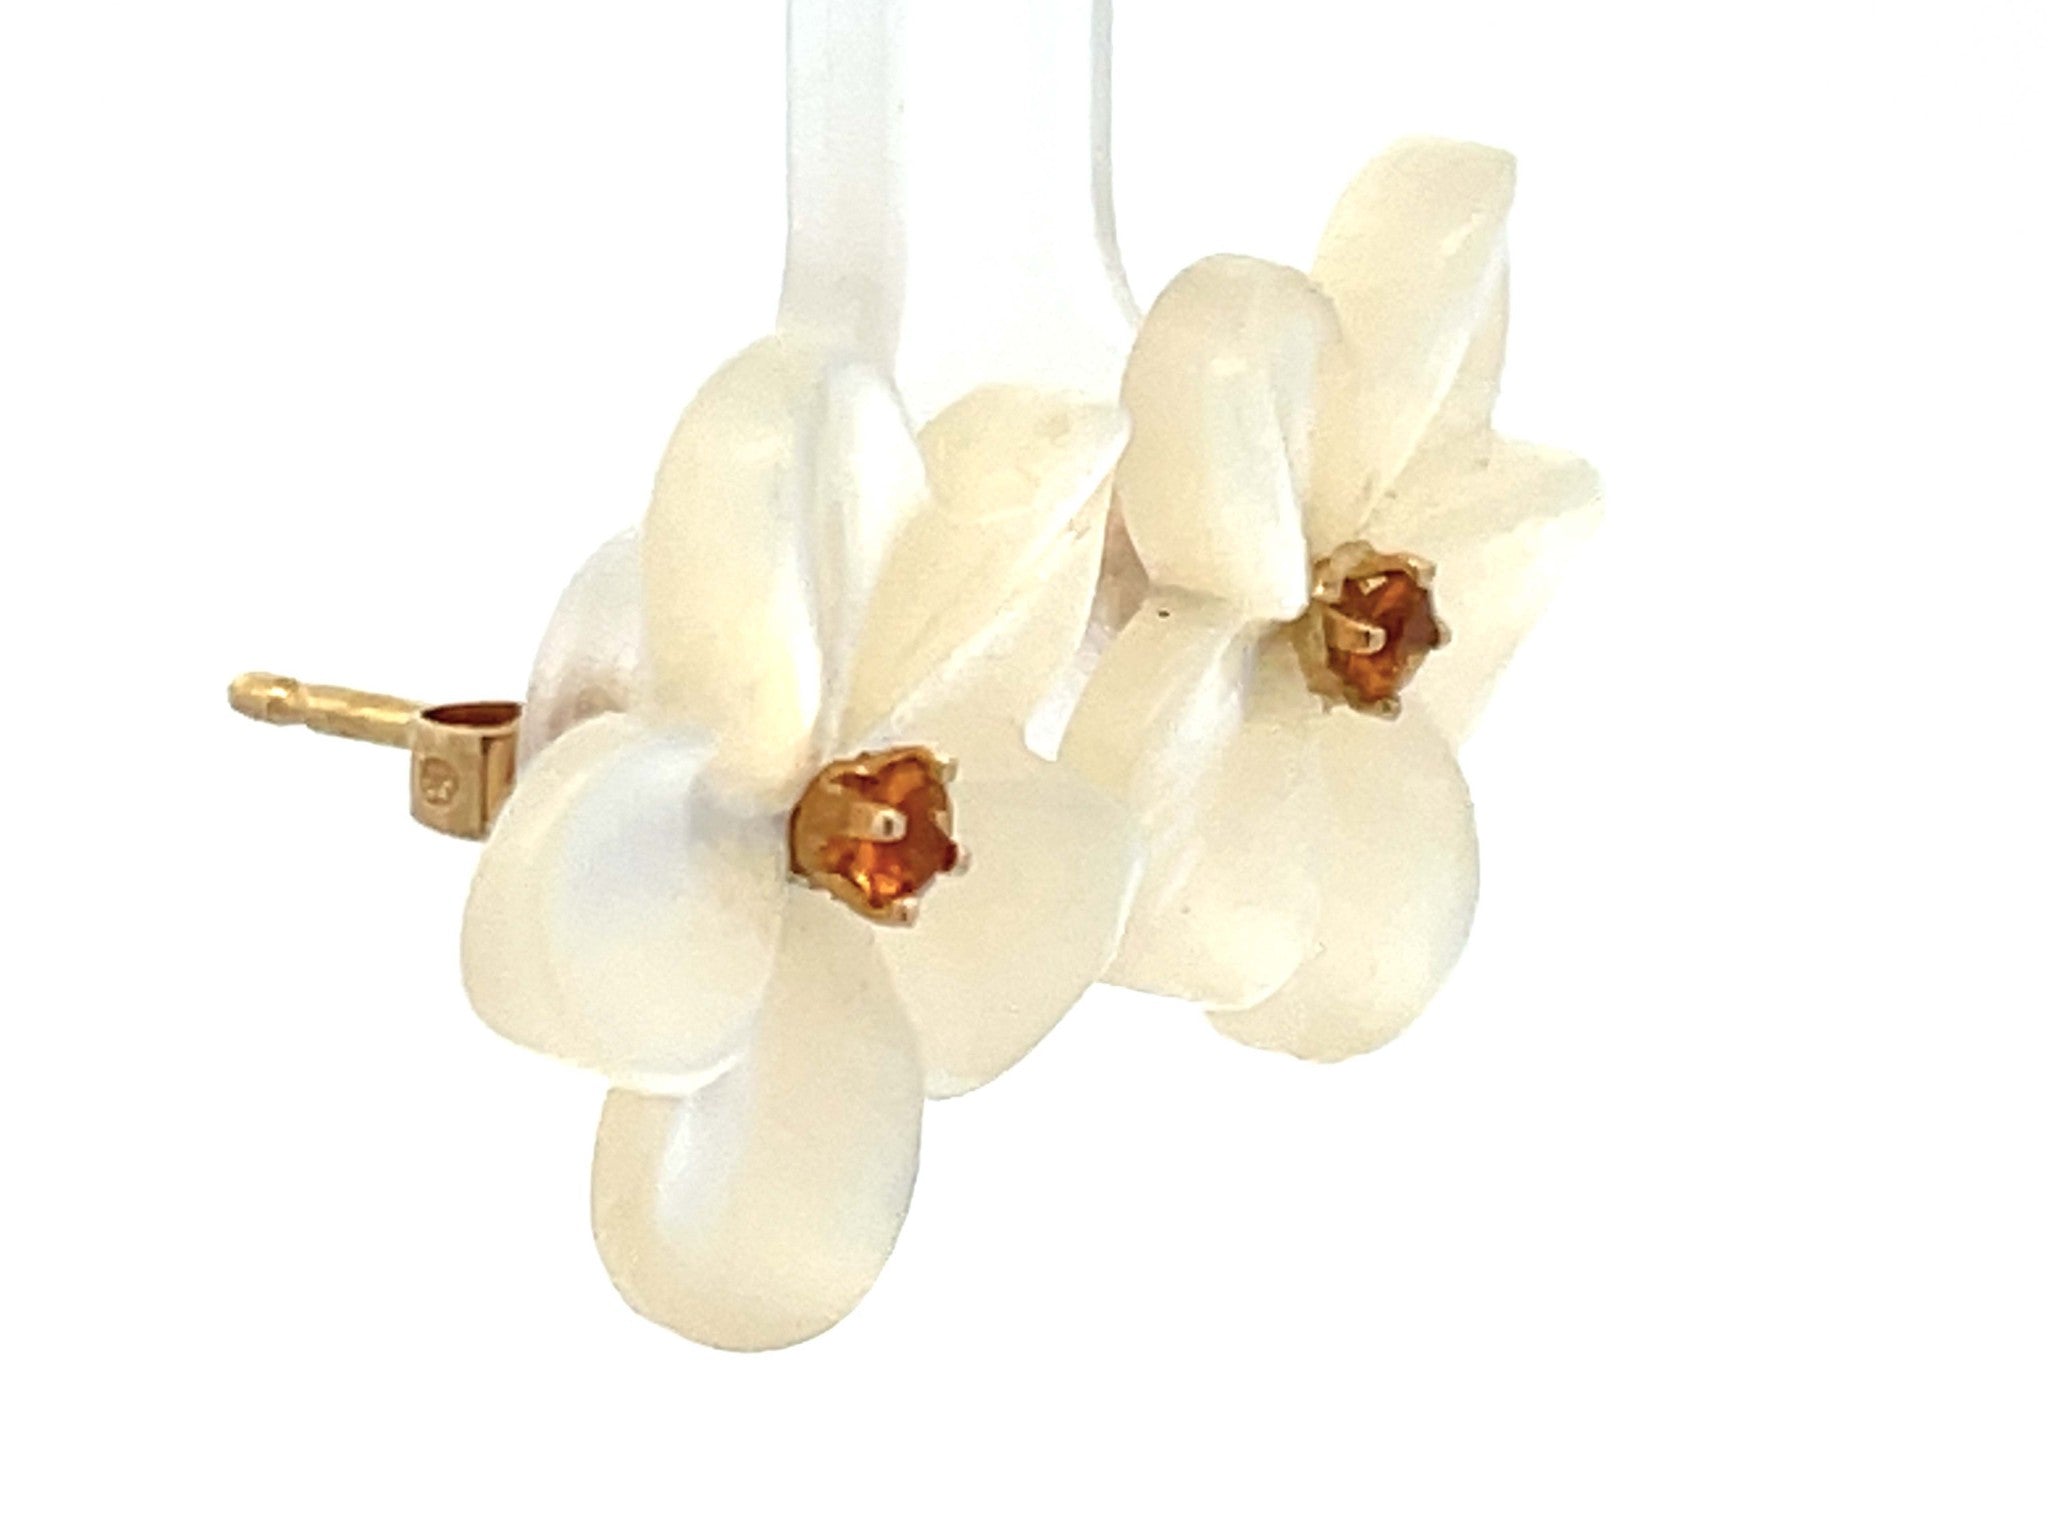 Mother of Pearl Flower Earrings with Yellow Topaz Centers in 14K Yellow Gold